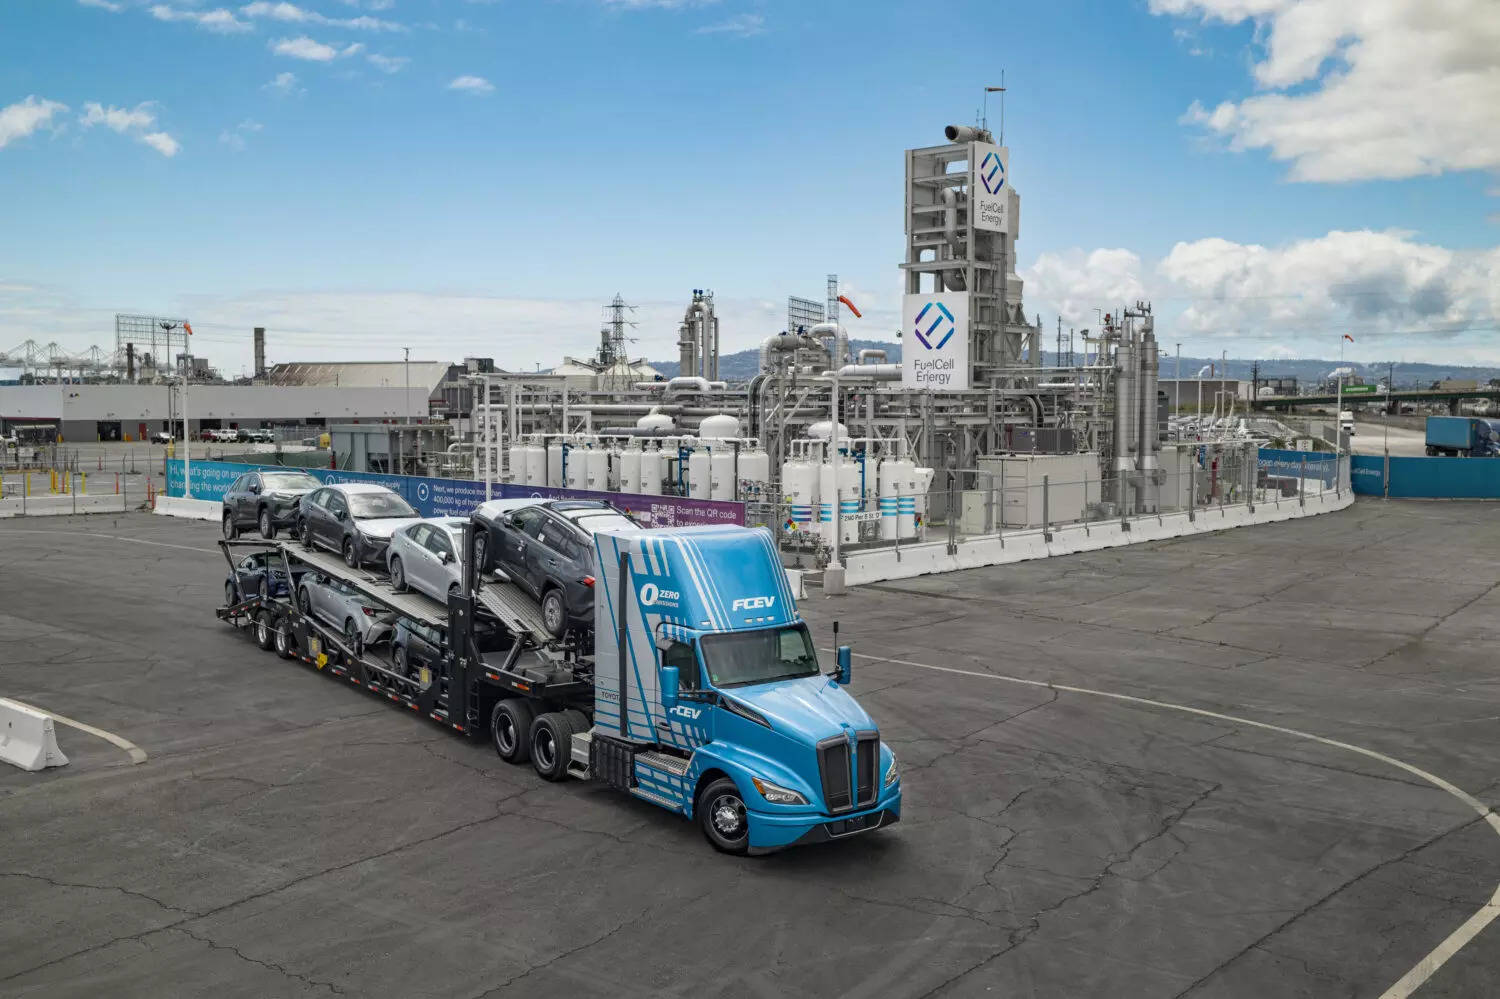 <p>Tri-gen produces 2.3-megawatts of renewable electricity, part of which will be utilized by TLS Long Beach to support its operations at the port. </p>